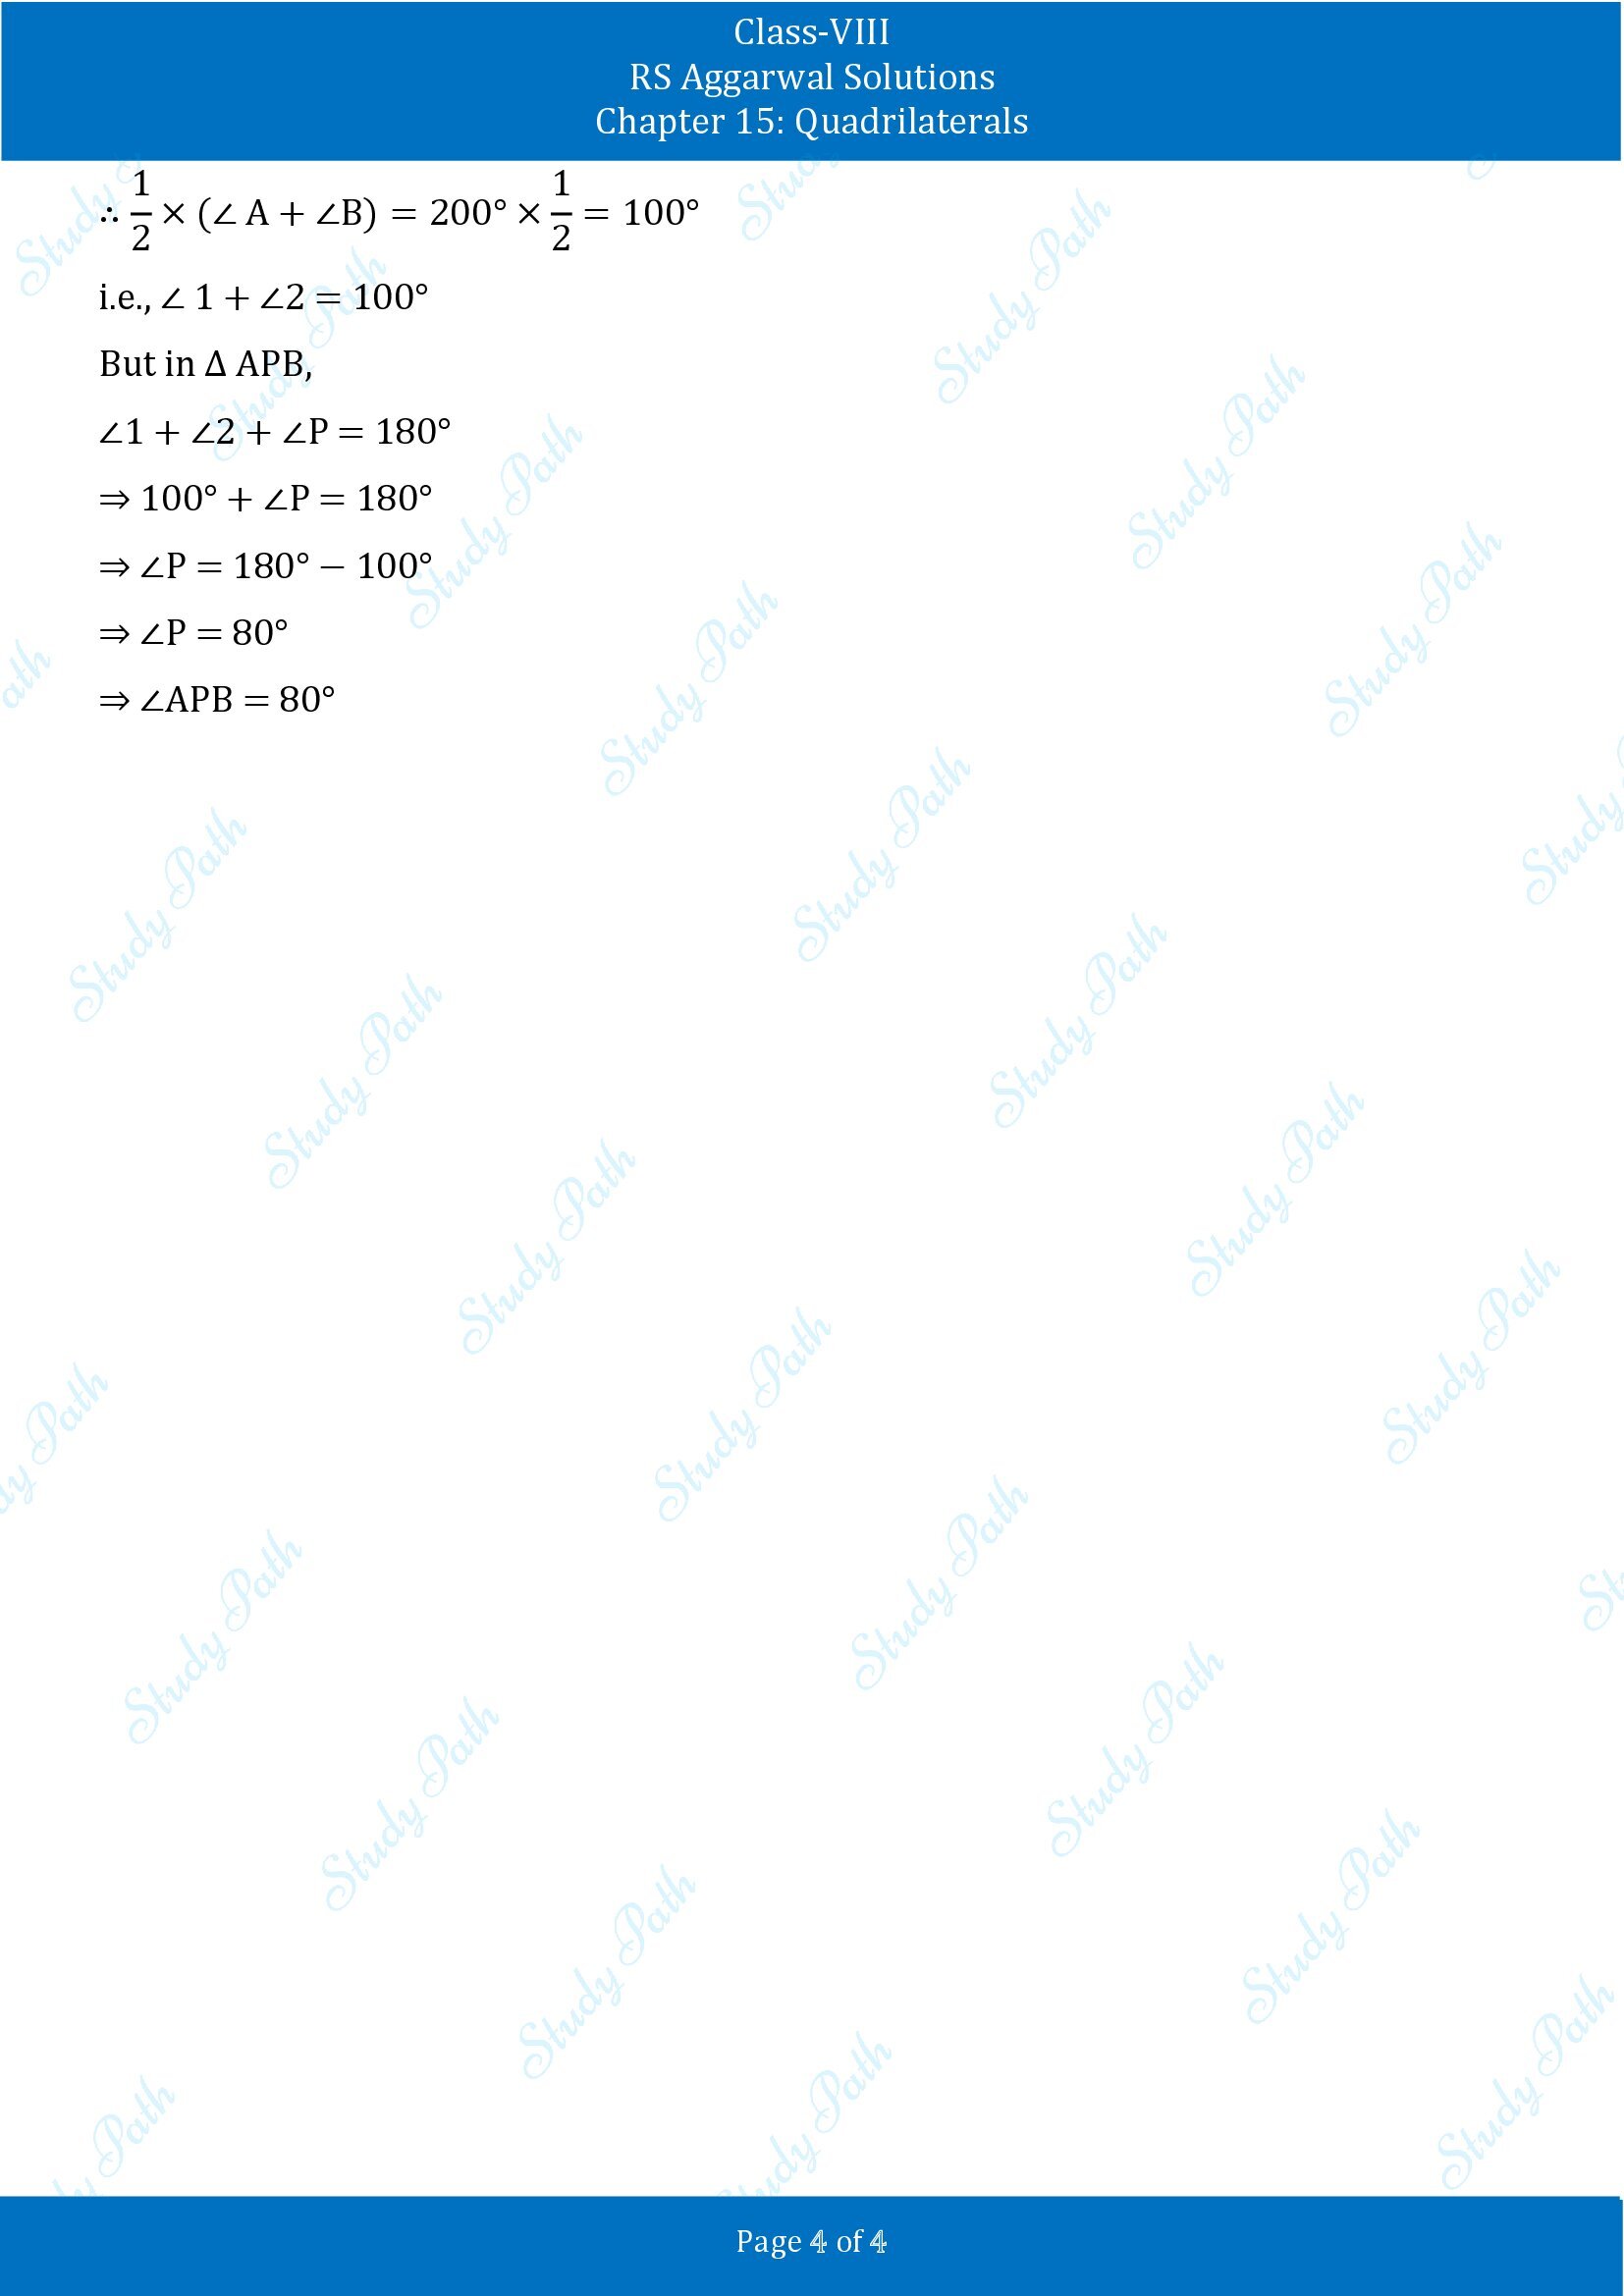 RS Aggarwal Solutions Class 8 Chapter 15 Quadrilaterals 00004